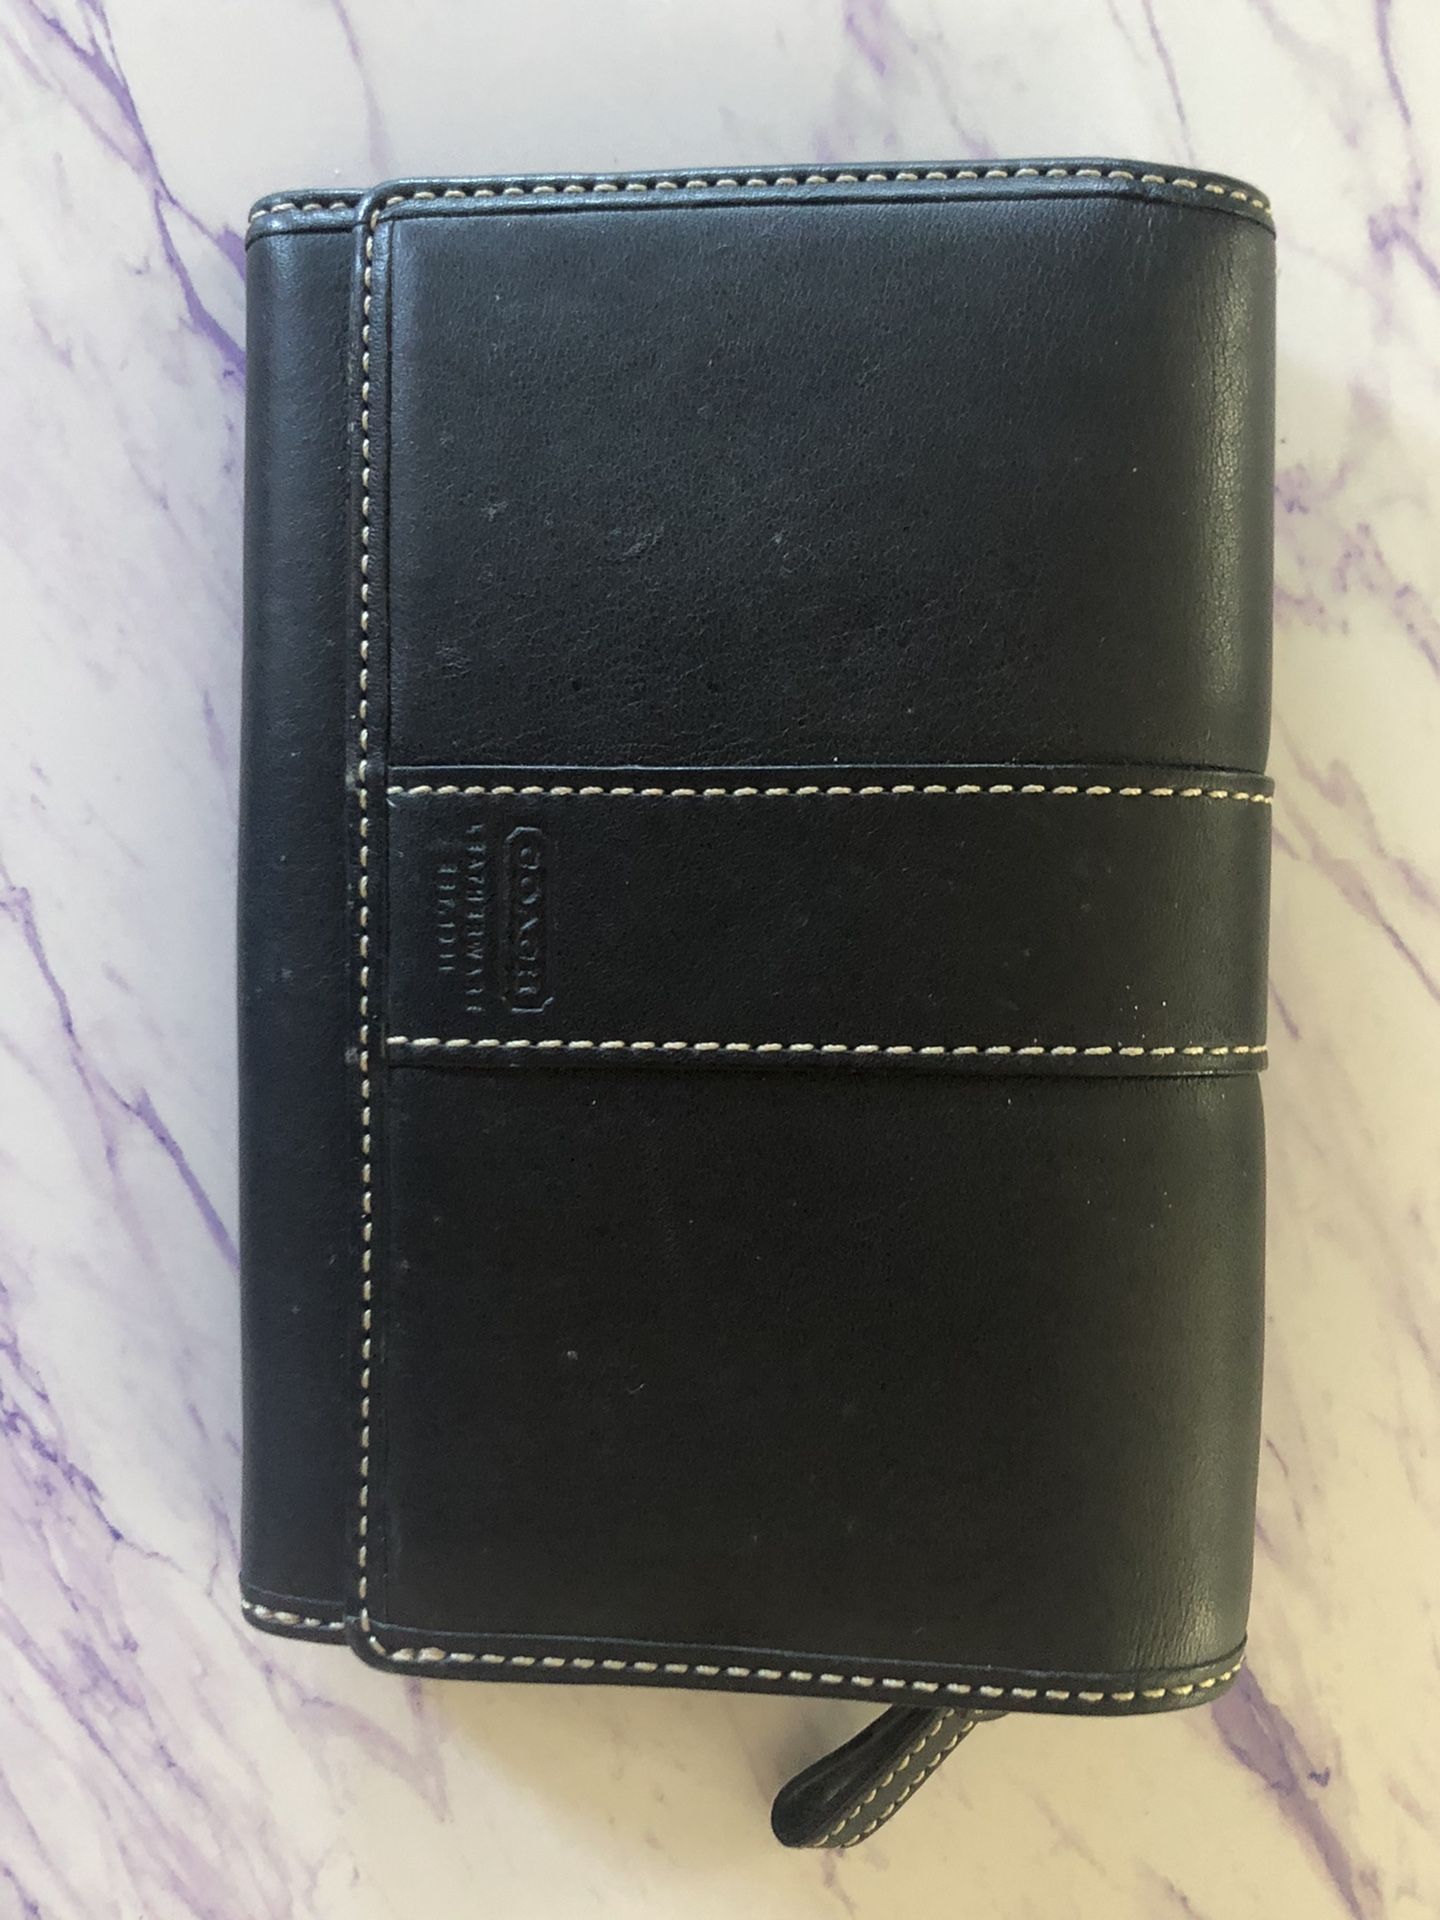 New Coach Black Leather Wallet